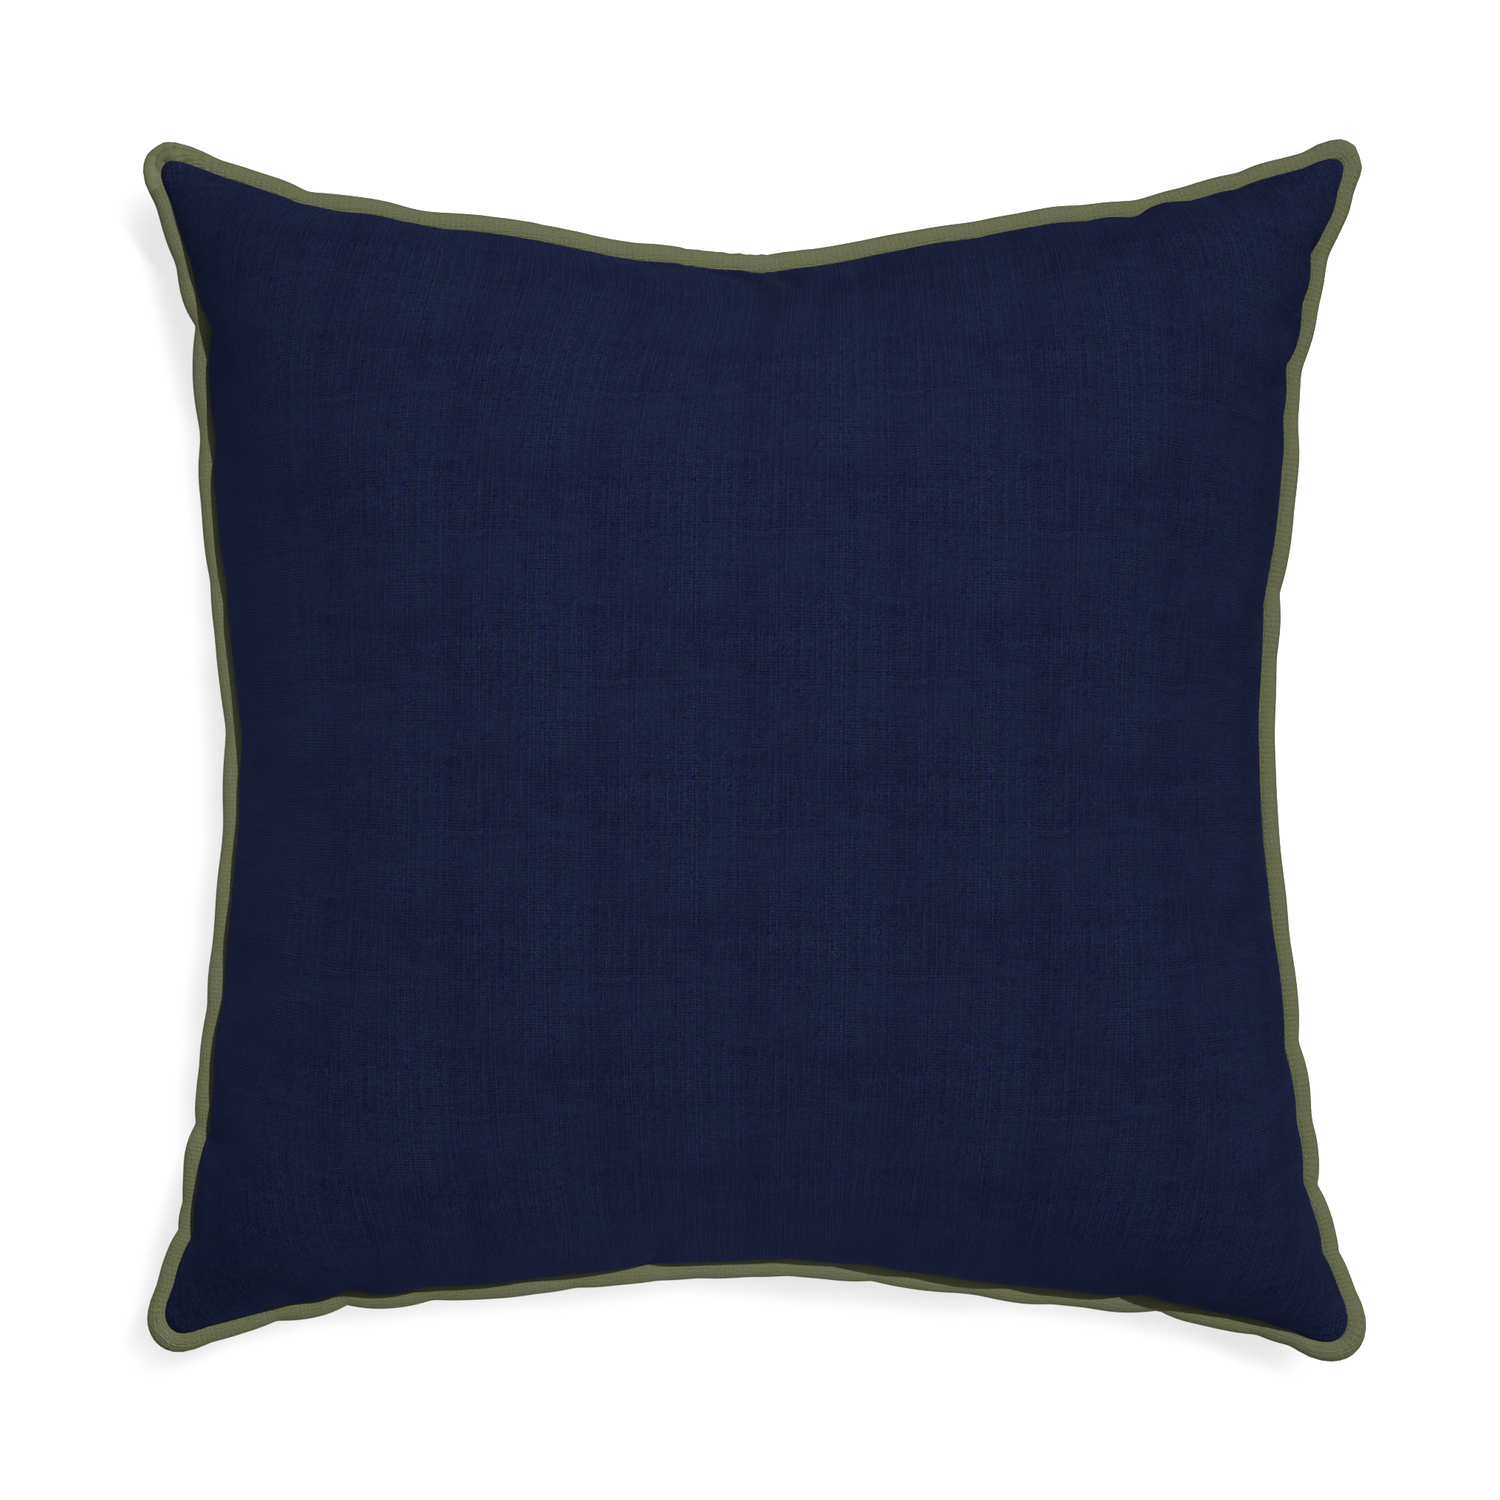 Euro-sham midnight custom pillow with f piping on white background